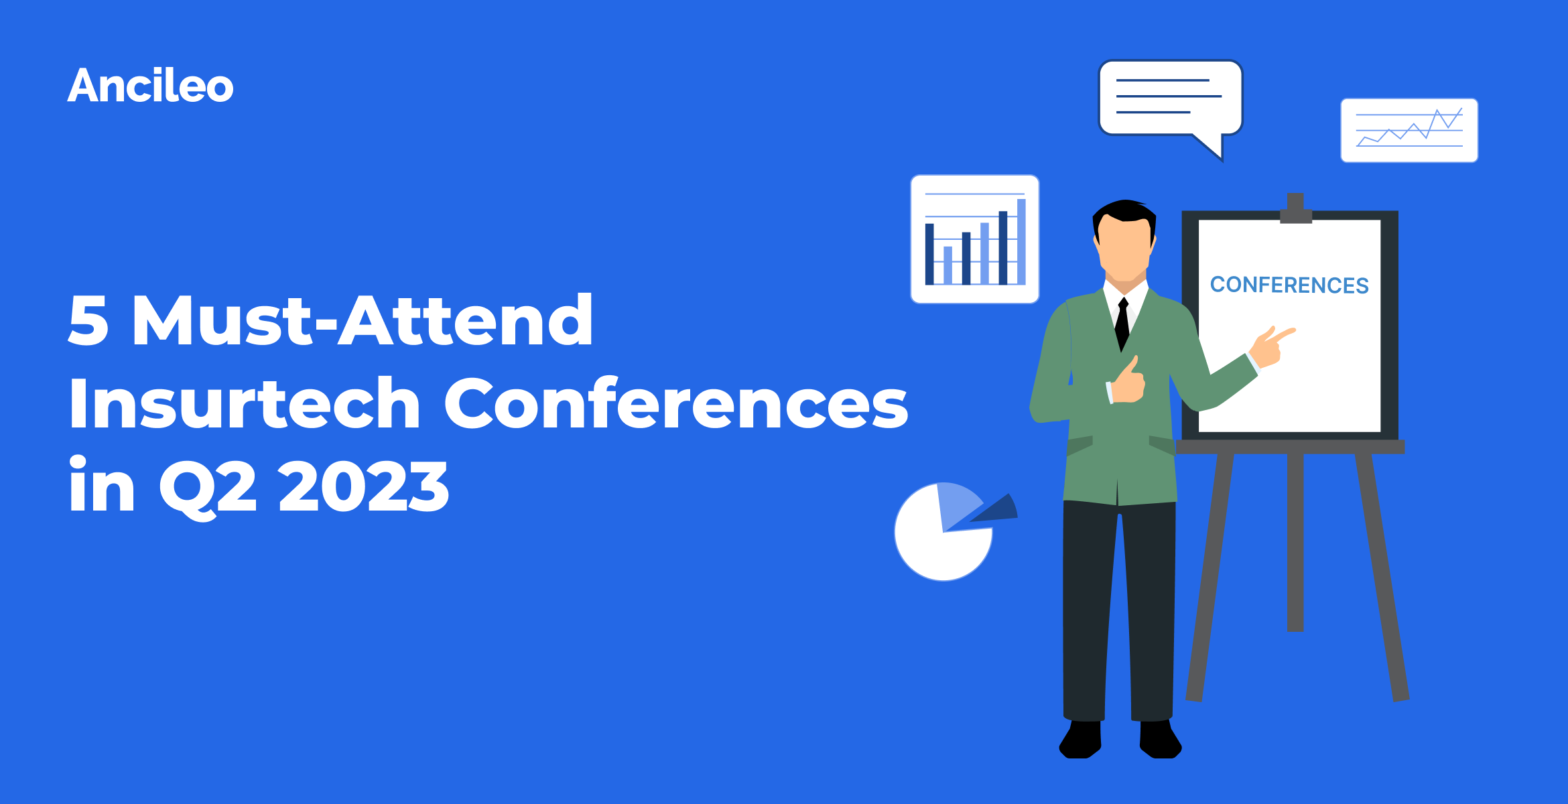 5 Must-Attend Insurtech Conferences in Q2 2023